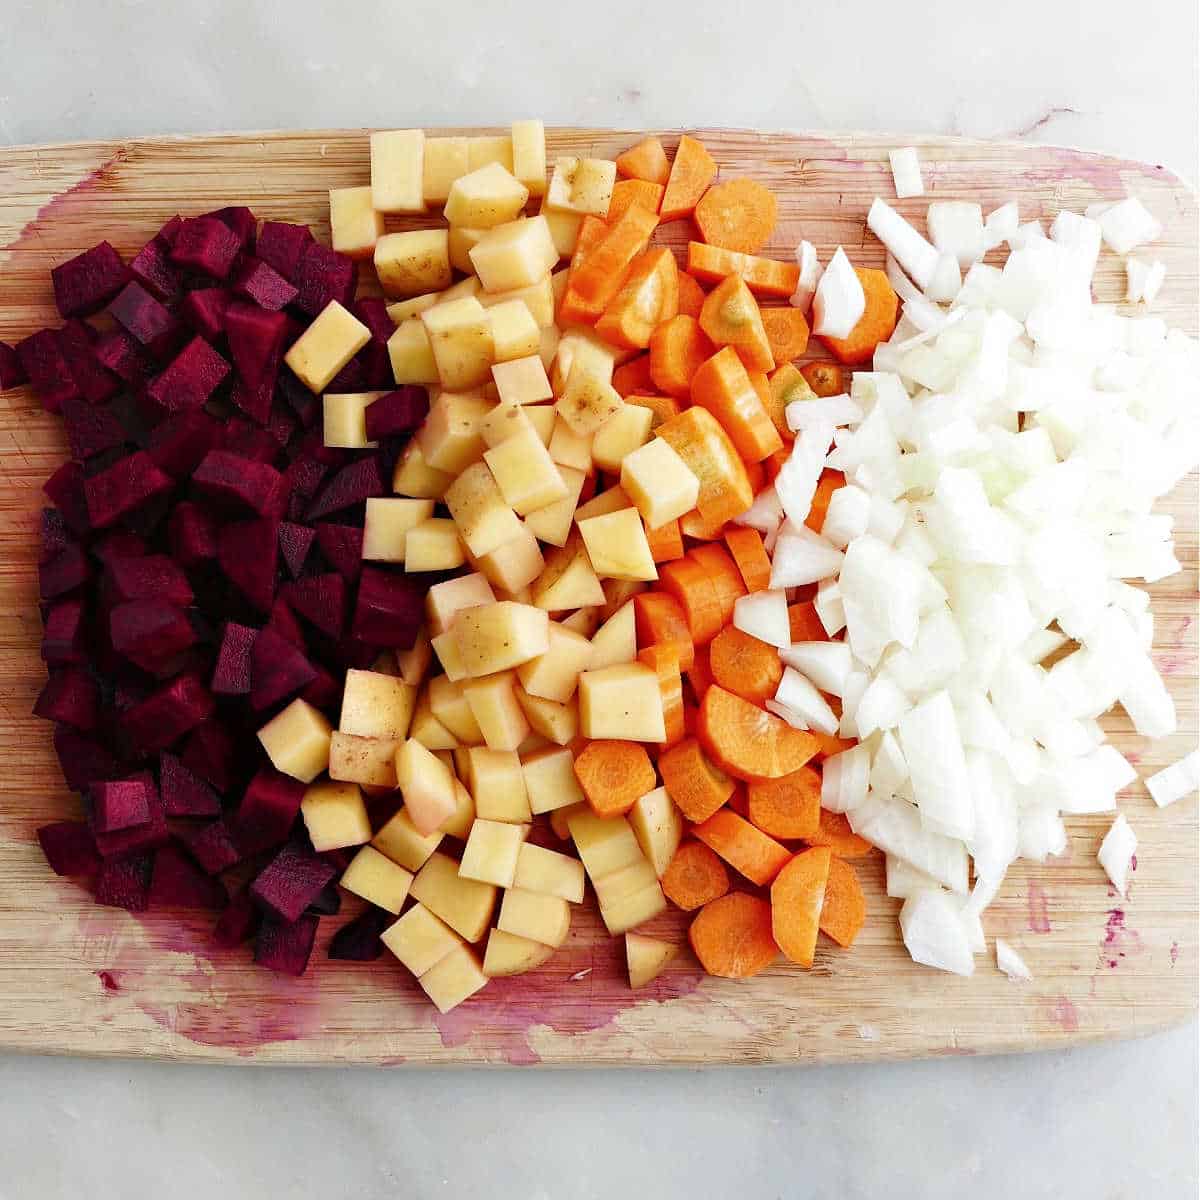 chopped beets, potatoes, carrots, and onion on a bamboo cutting board